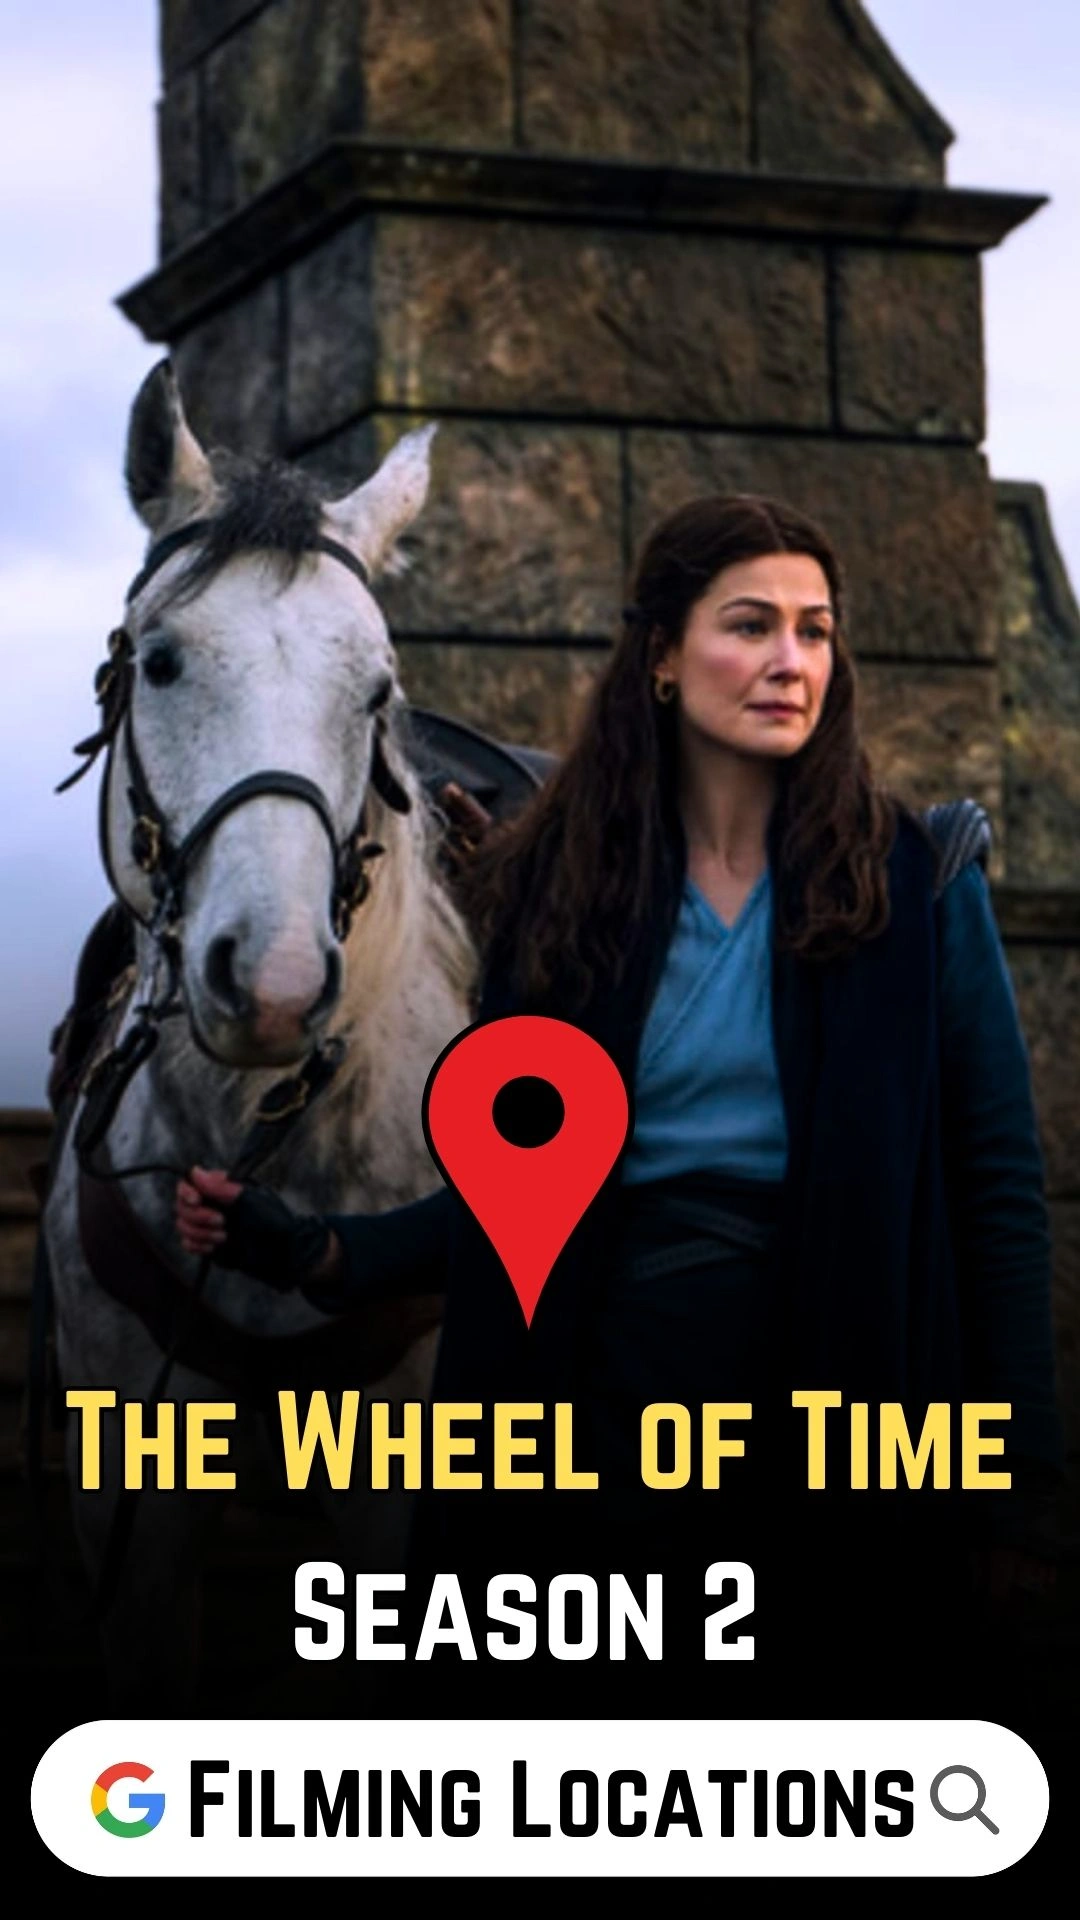 The Wheel of Time Season 2 Filming Locations